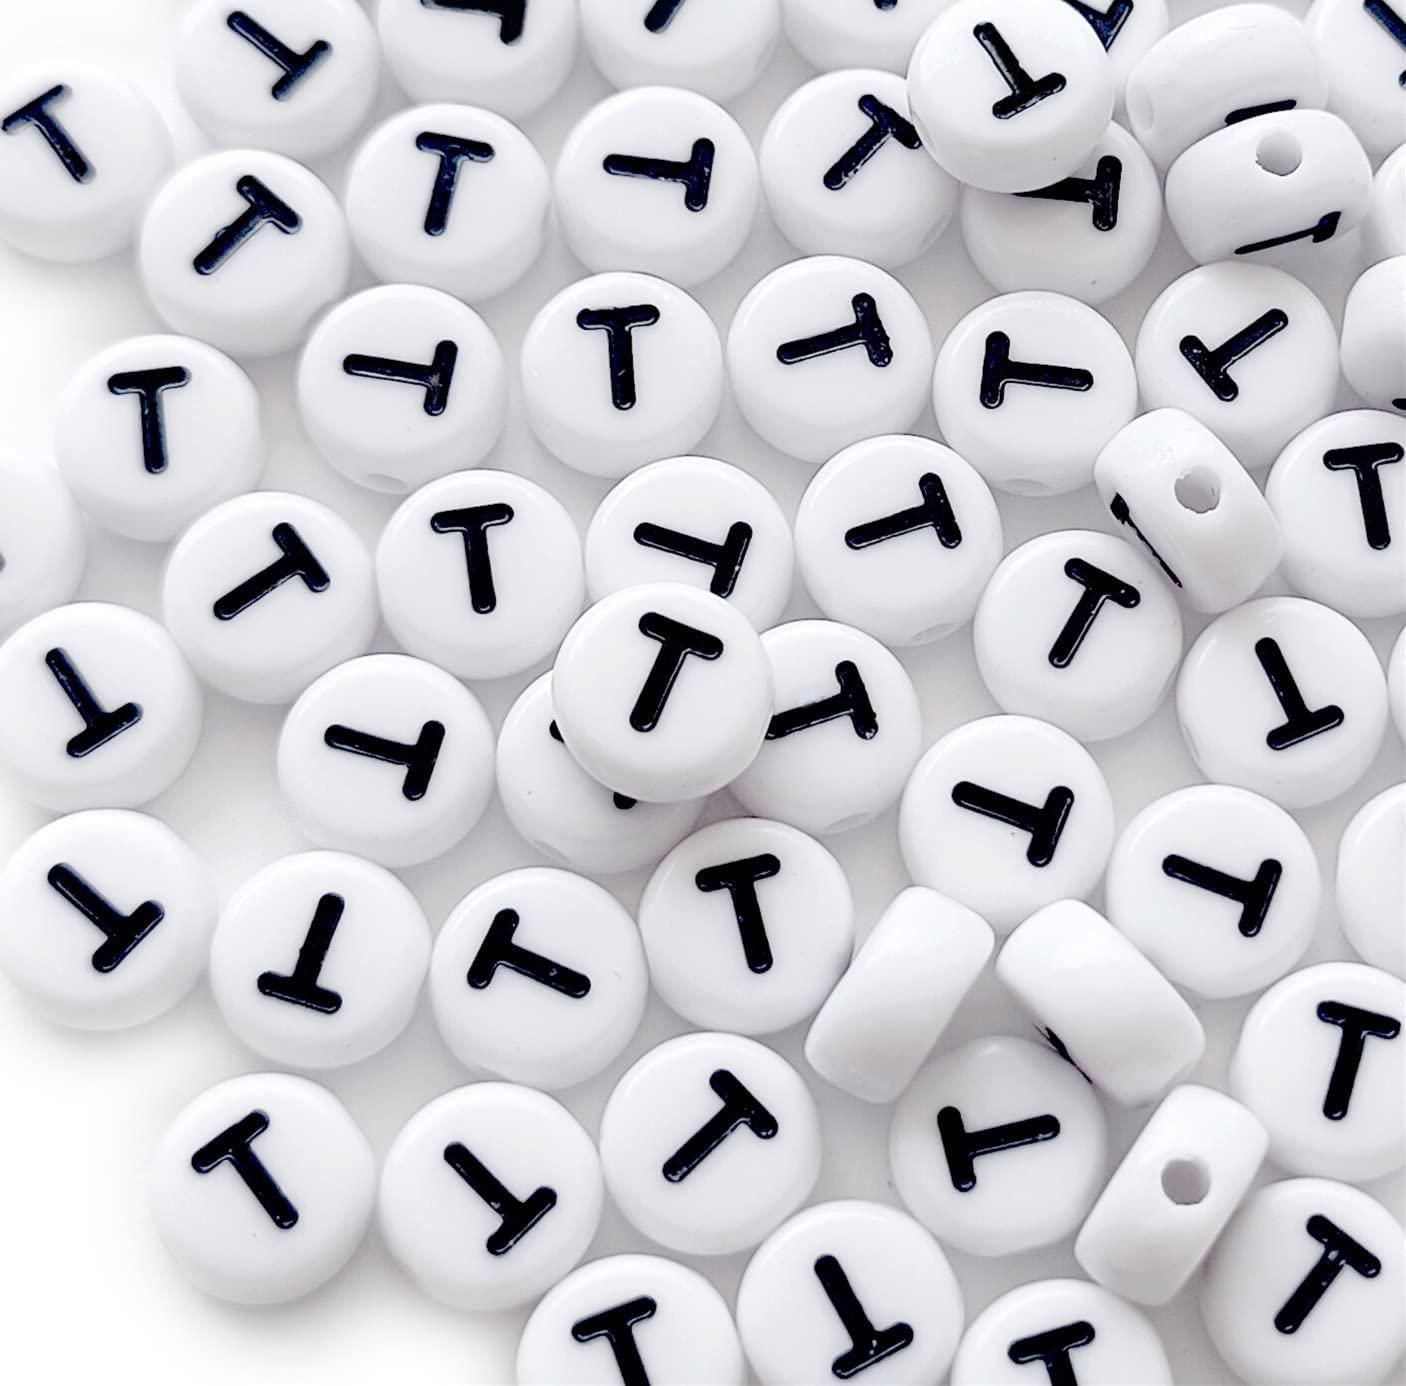 Bxwoum 100PCS Number Beads 4x7mm Acrylic Number Beads White Round Number 9  Beads for Jewelry Making DIY Bracelets Necklaces Key Chains(Number